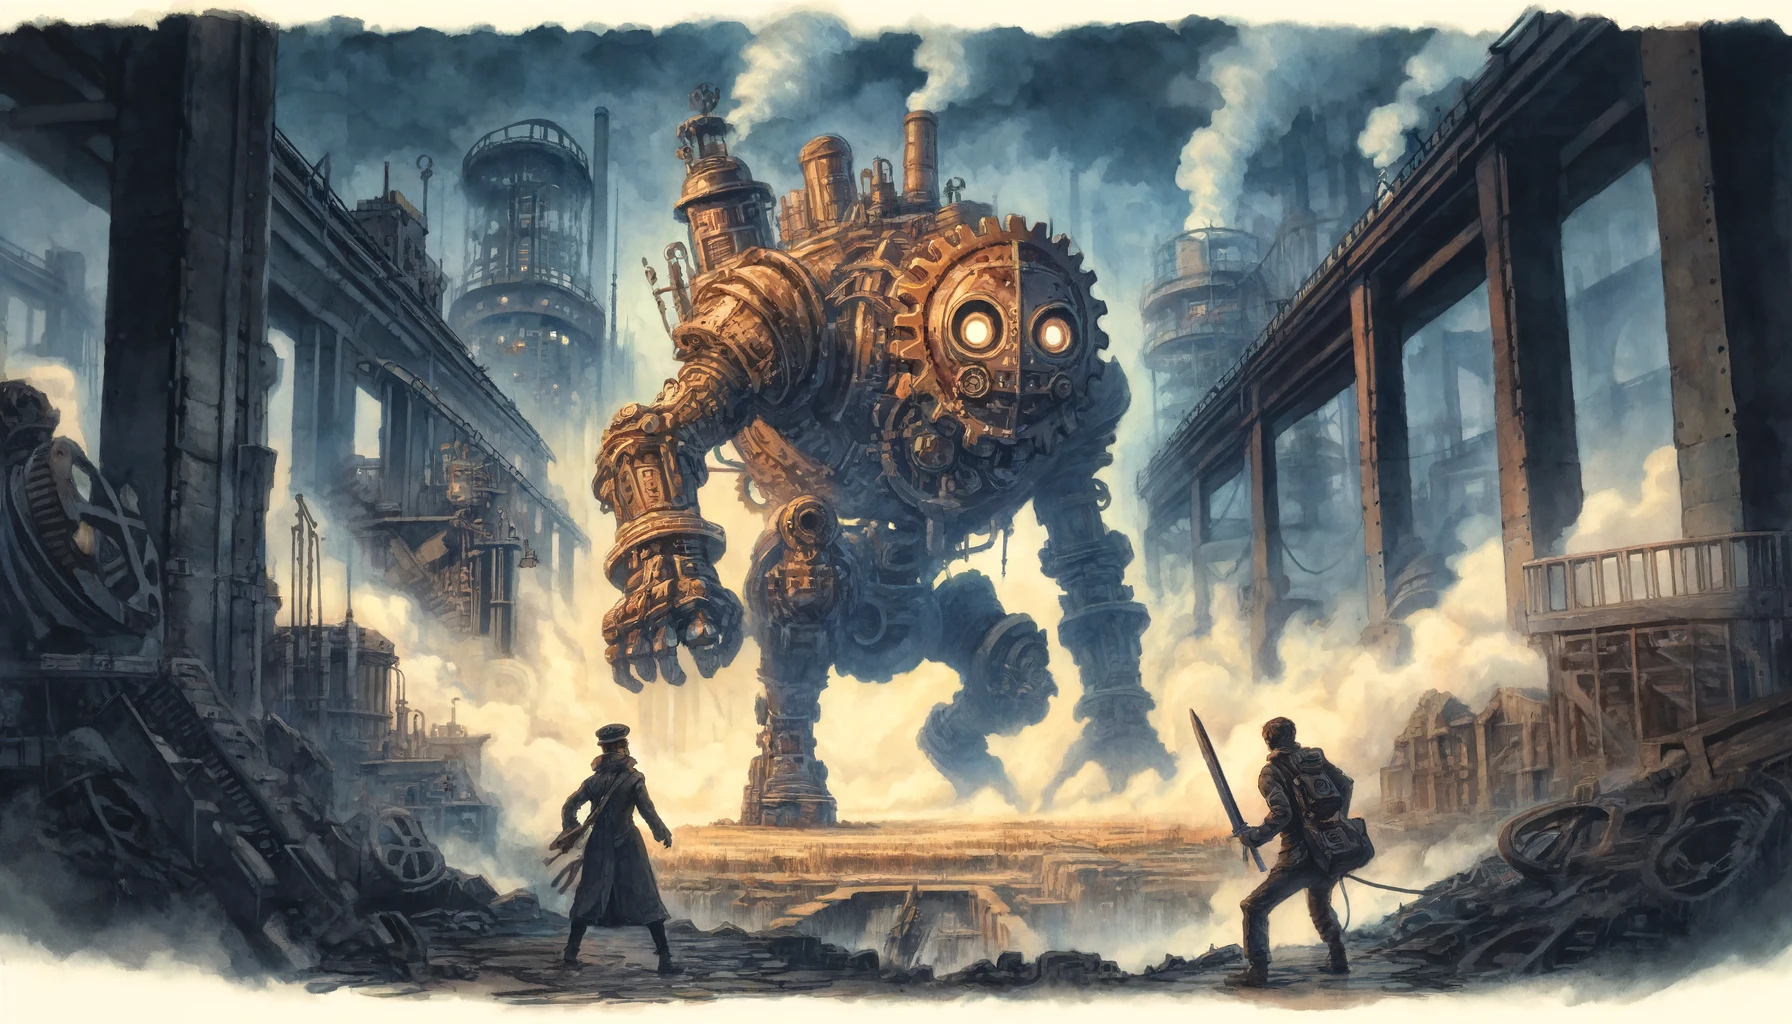 Two adventurers cautiously approach a massive, rusted clockwork beast. The beast's gears and cogs are visible, and it stands amidst the ruins of an ancient factory. Steam rises from vents in the ground, and the sky is filled with dark, smoky clouds. The adventurers, one wielding a sword and the other holding a gadget, are ready for battle. The scene is both eerie and dramatic.